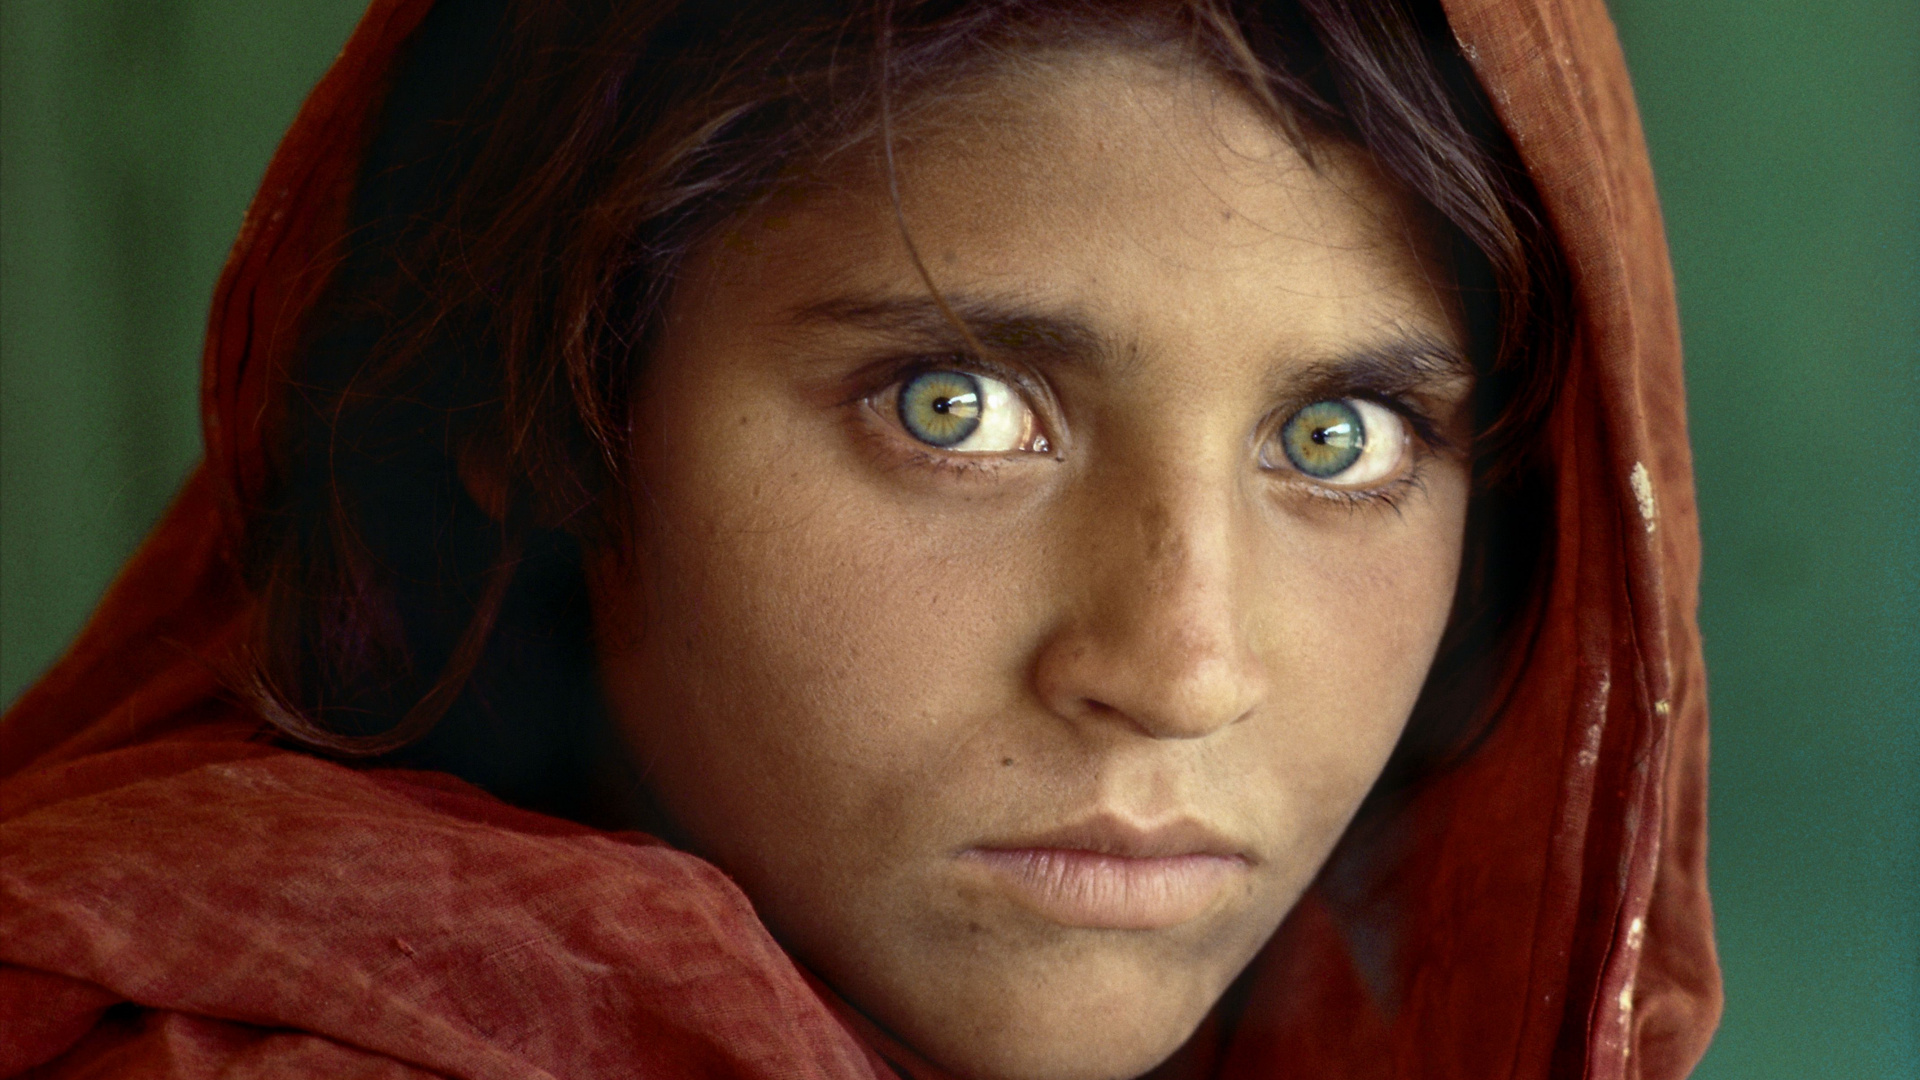 Afghan Girl, Afghanistan, National Geographic, Face, Eye. Wallpaper in 1920x1080 Resolution